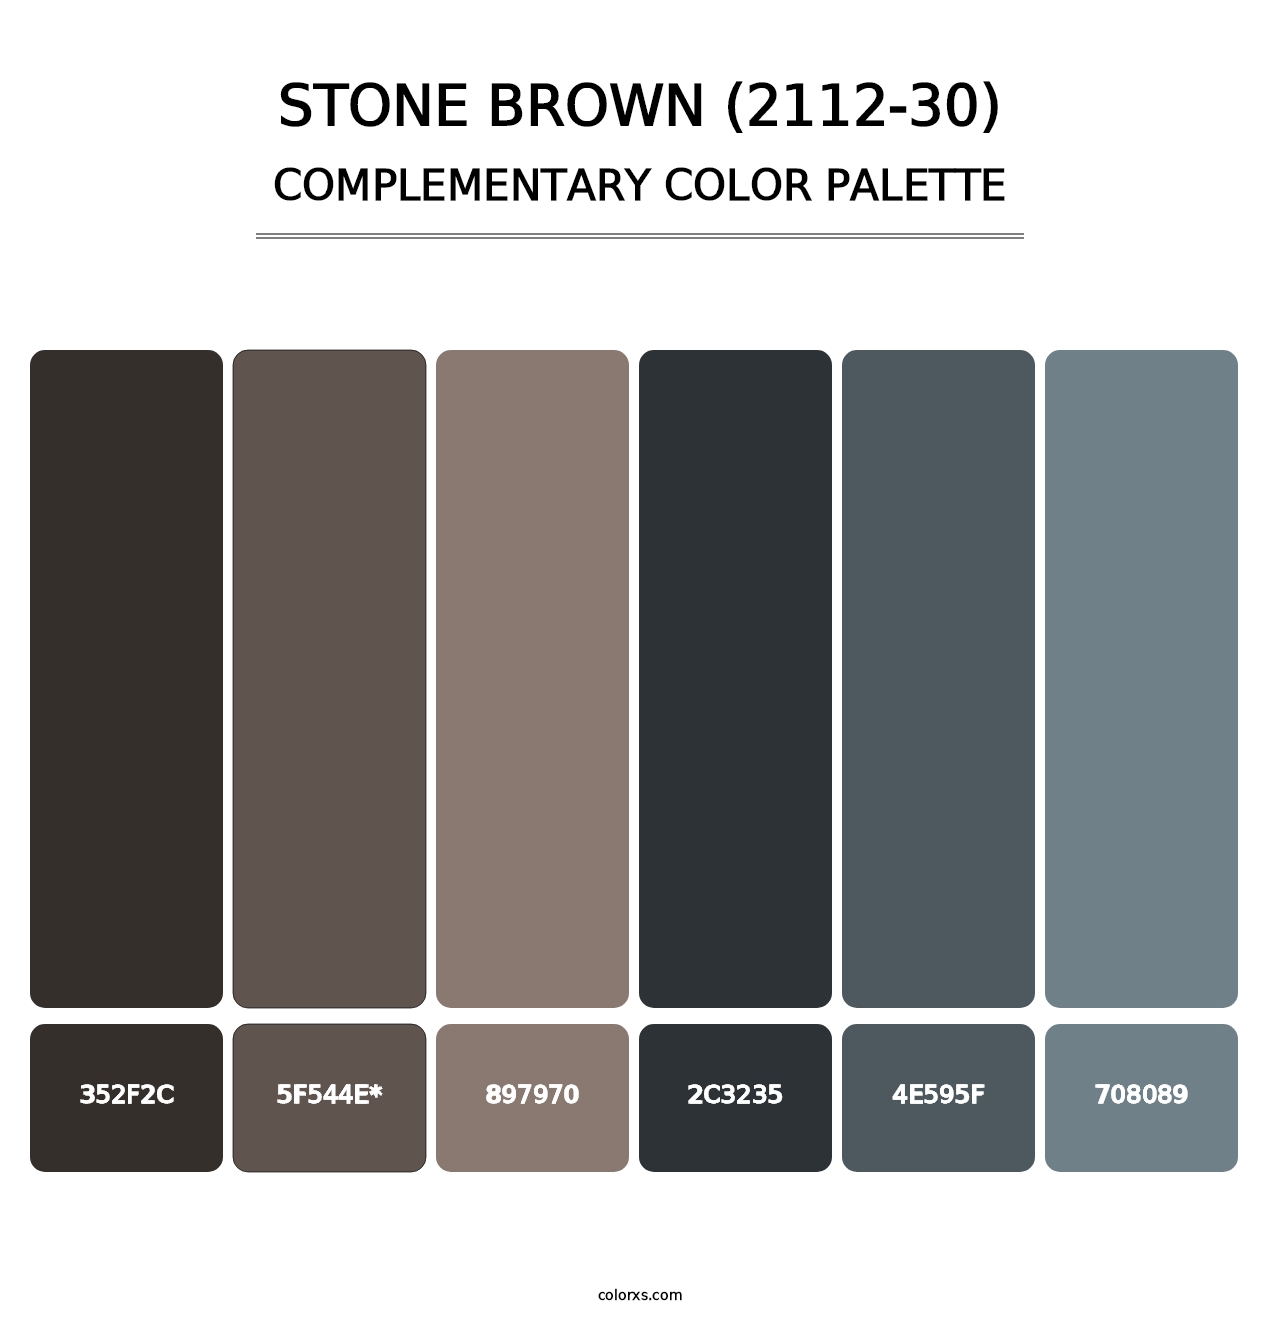 Stone Brown (2112-30) - Complementary Color Palette